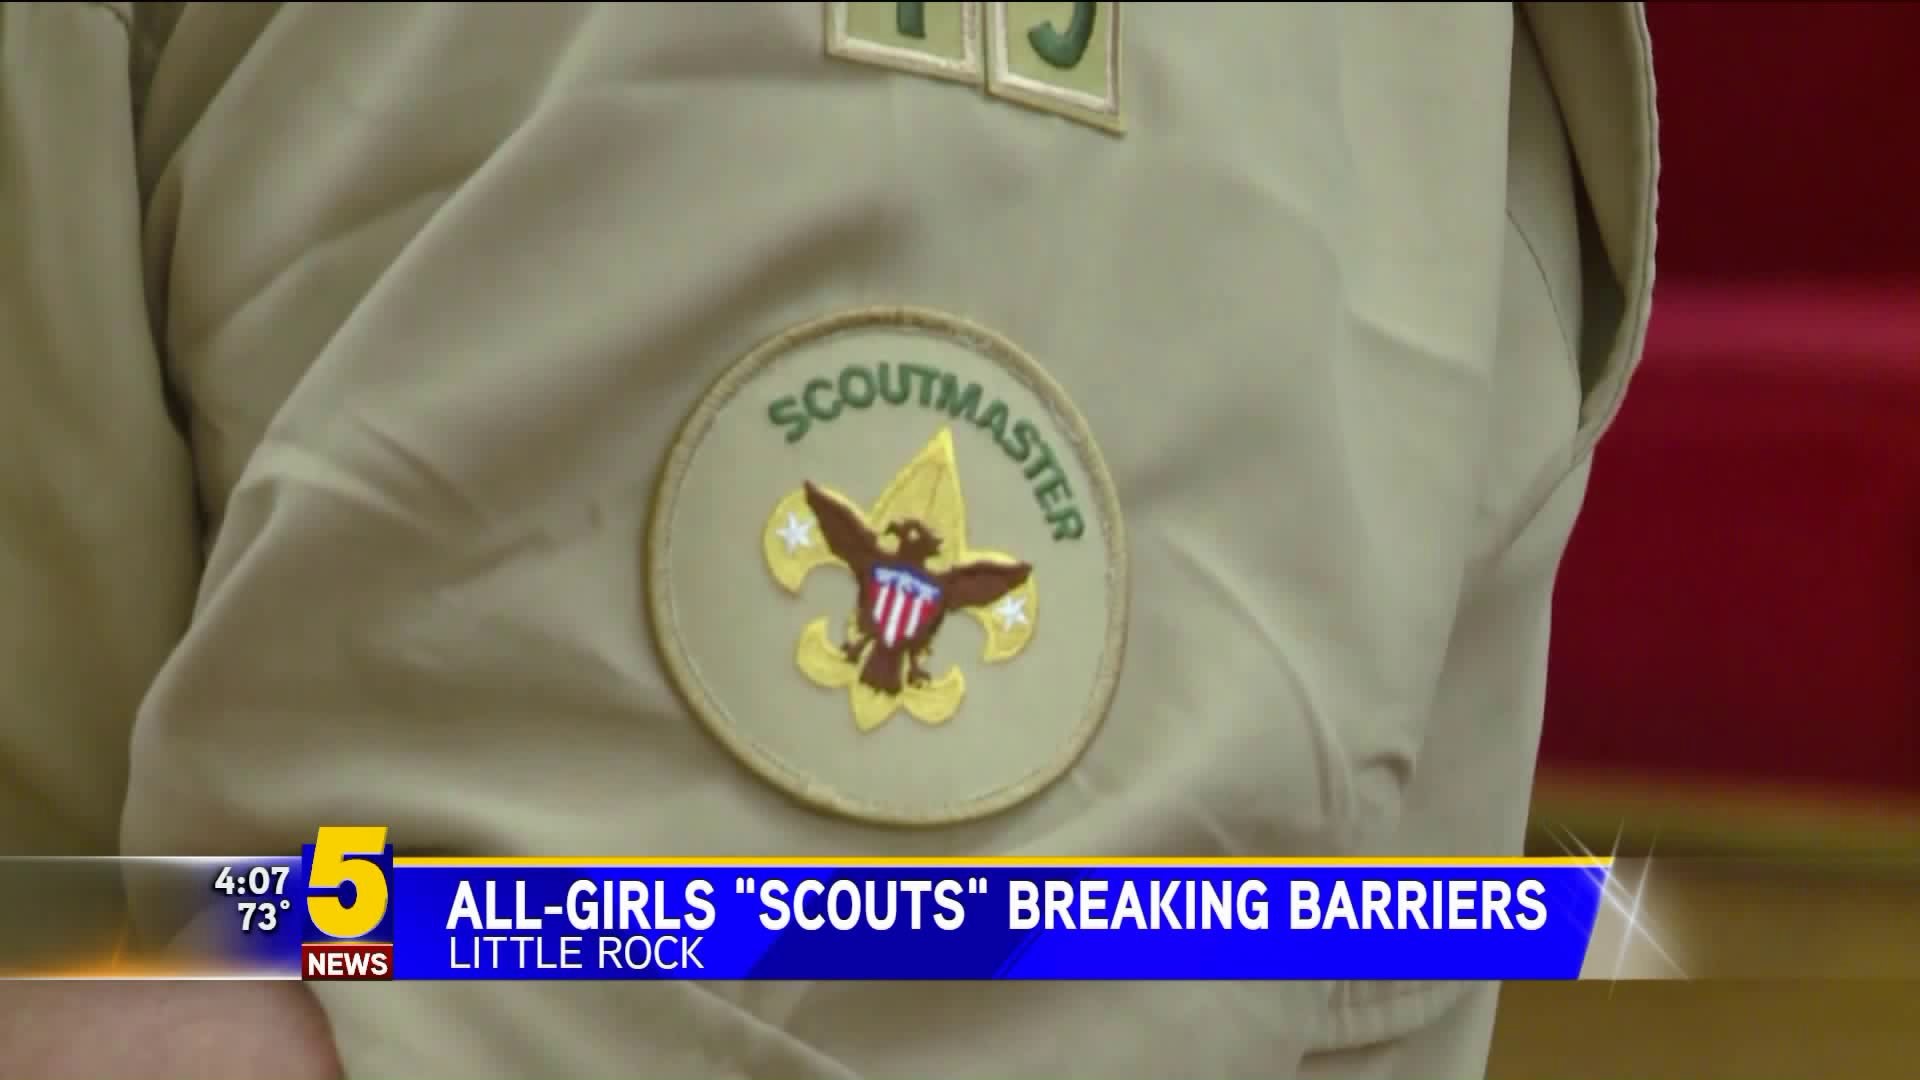 All-Girls "Scouts" Breaking Barriers In Central Arkansas